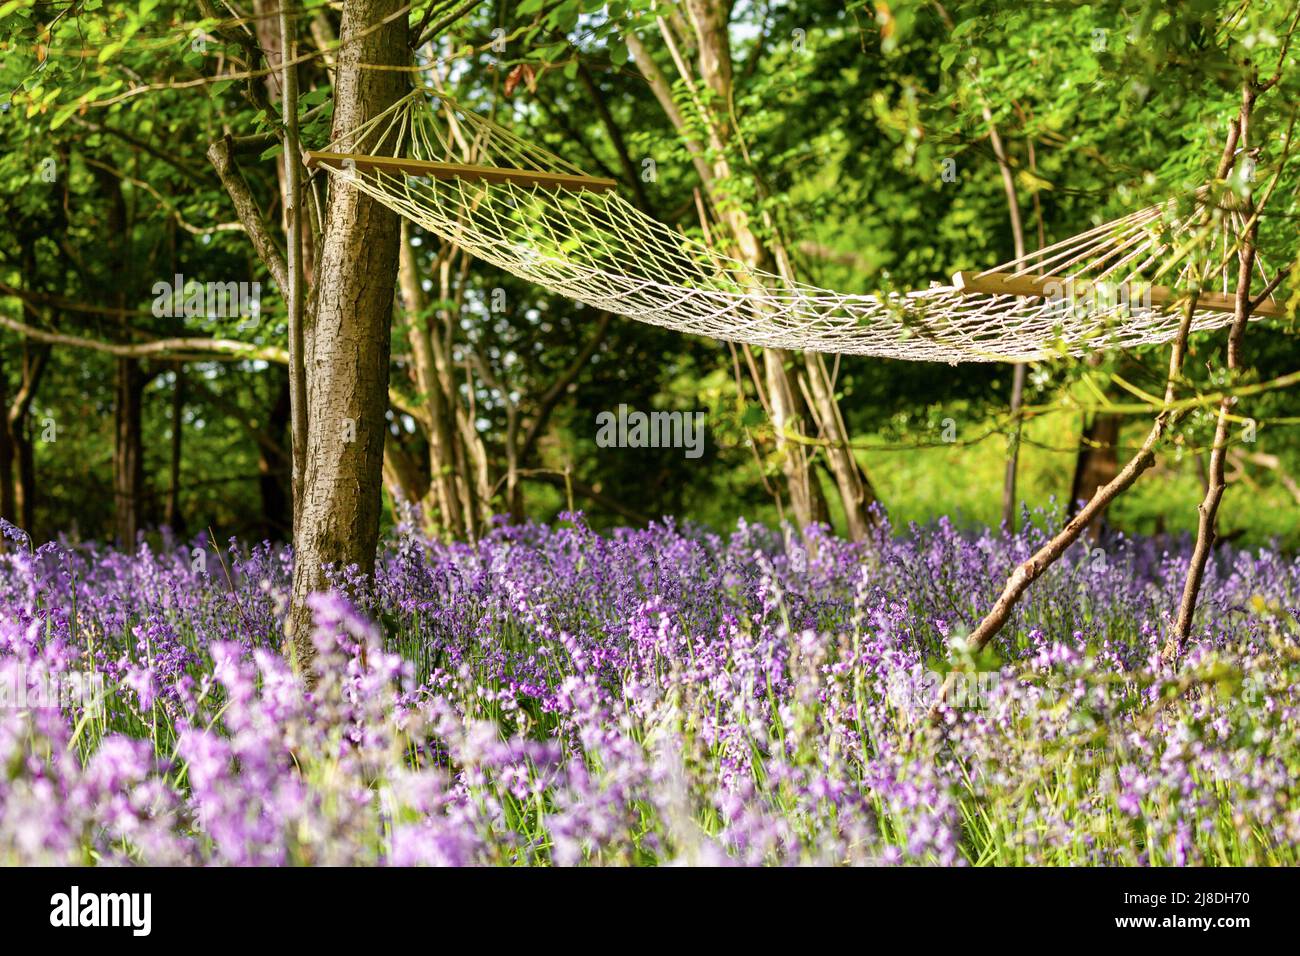 Hammock tied between trees in bluebell woods at dawn. Relaxing scene in nature with purple wild flowers Stock Photo